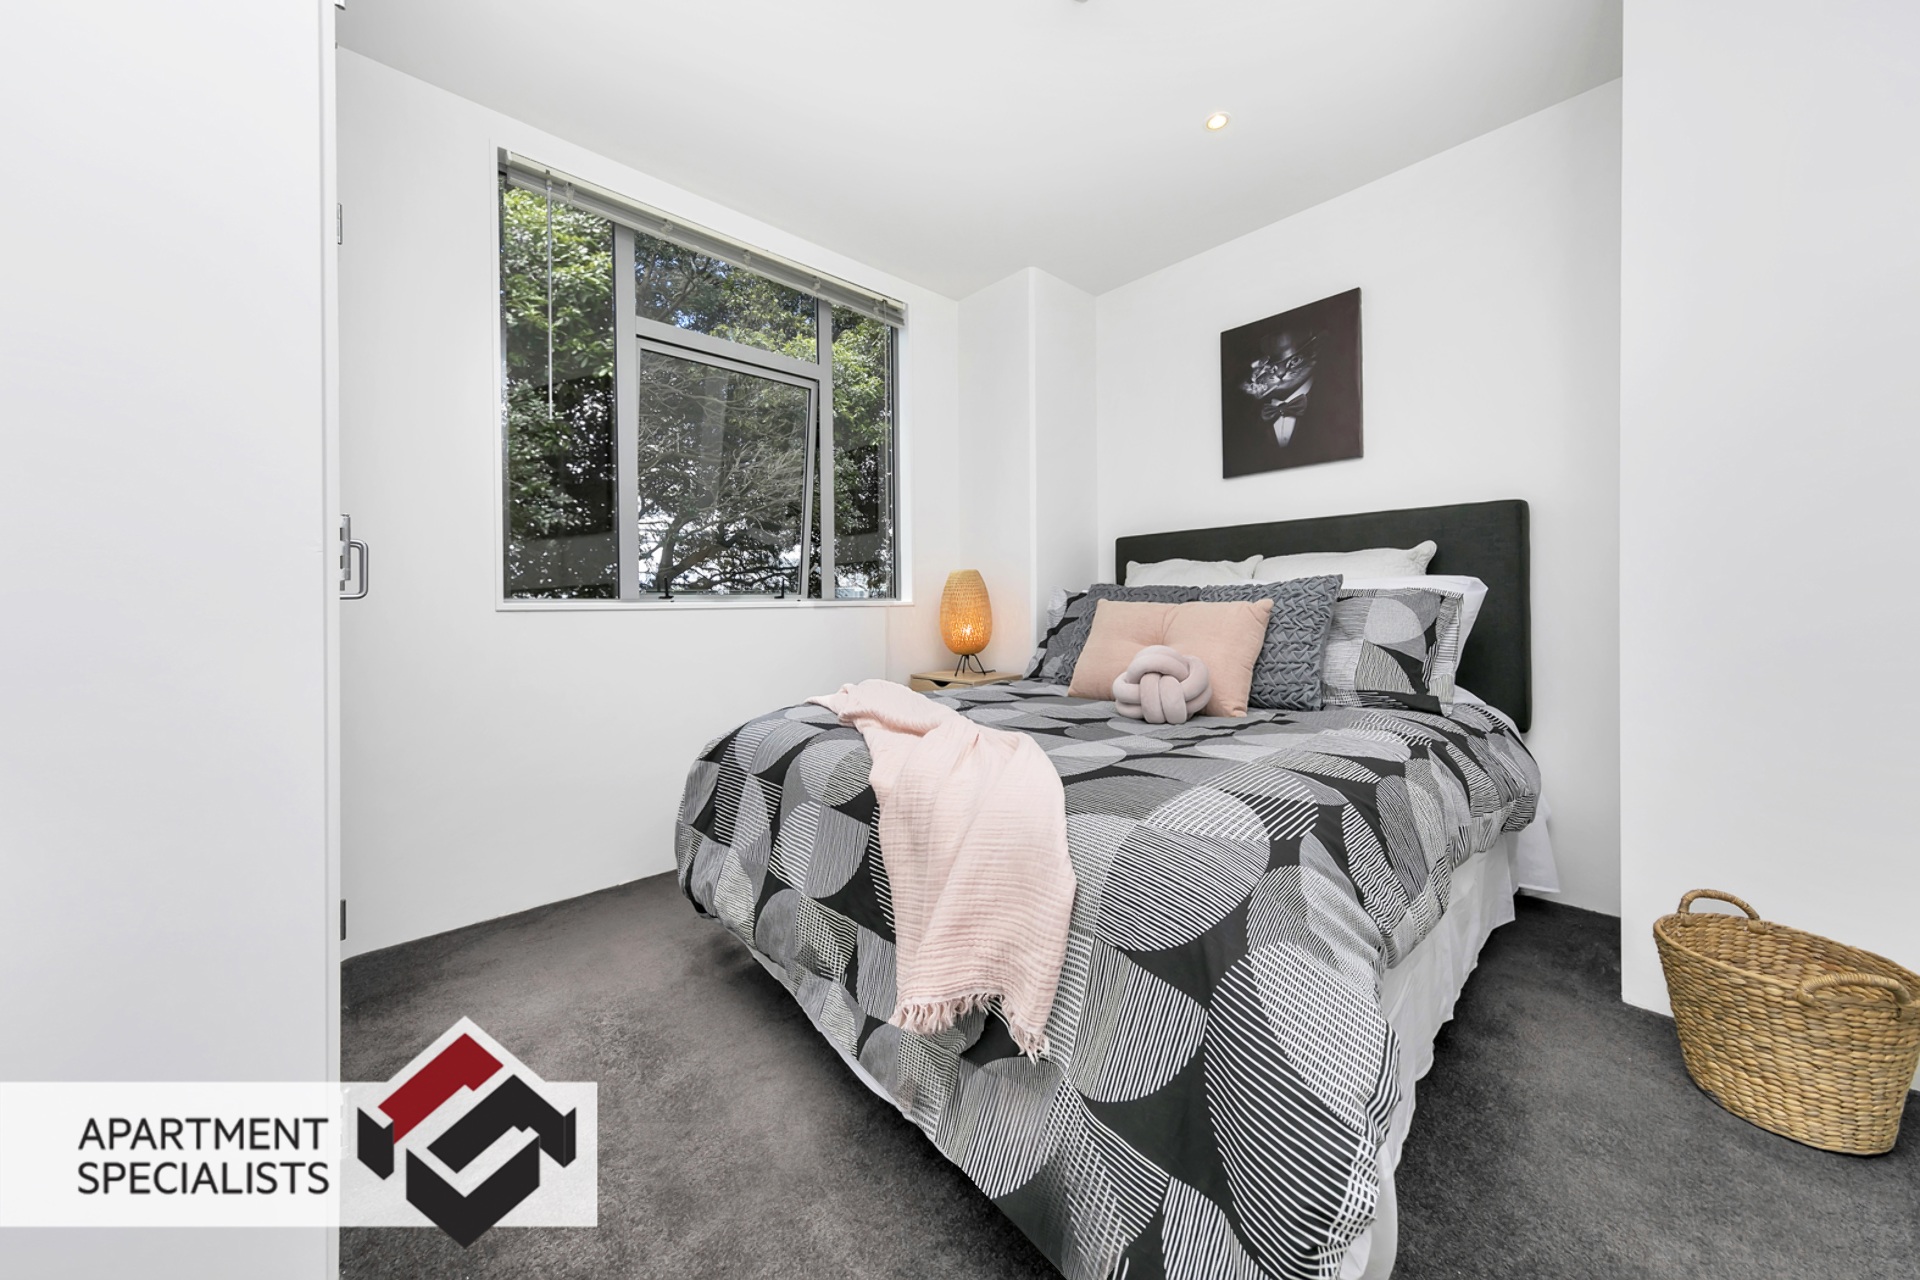 2 | 10 Ronayne Street, Parnell | Apartment Specialists